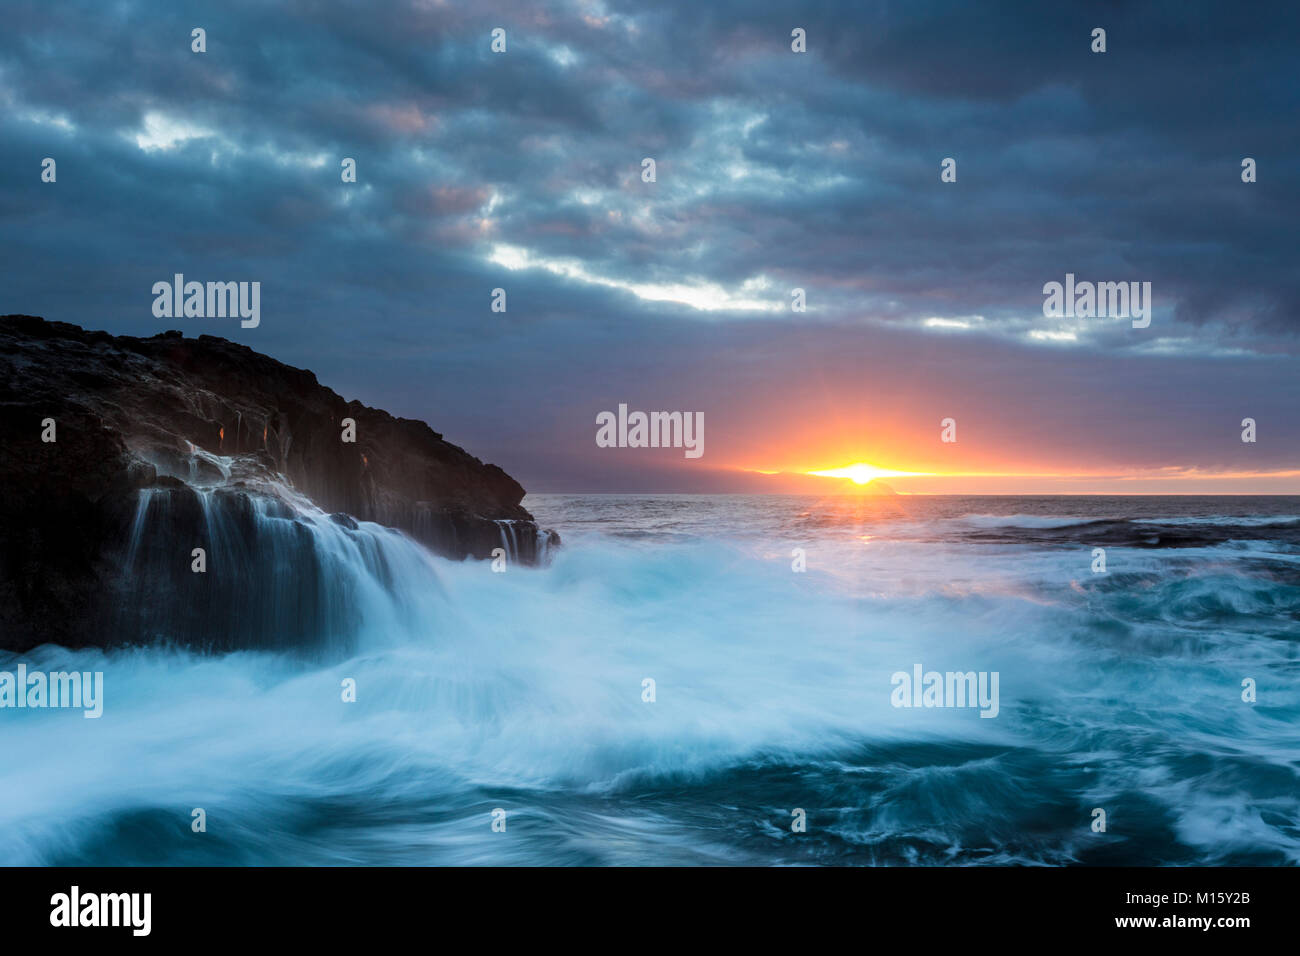 Surf,rocky coast with foaming waves at sunset,Puerto de la Madera,Tacoronte,Tenerife,Canary Islands,Spain Stock Photo